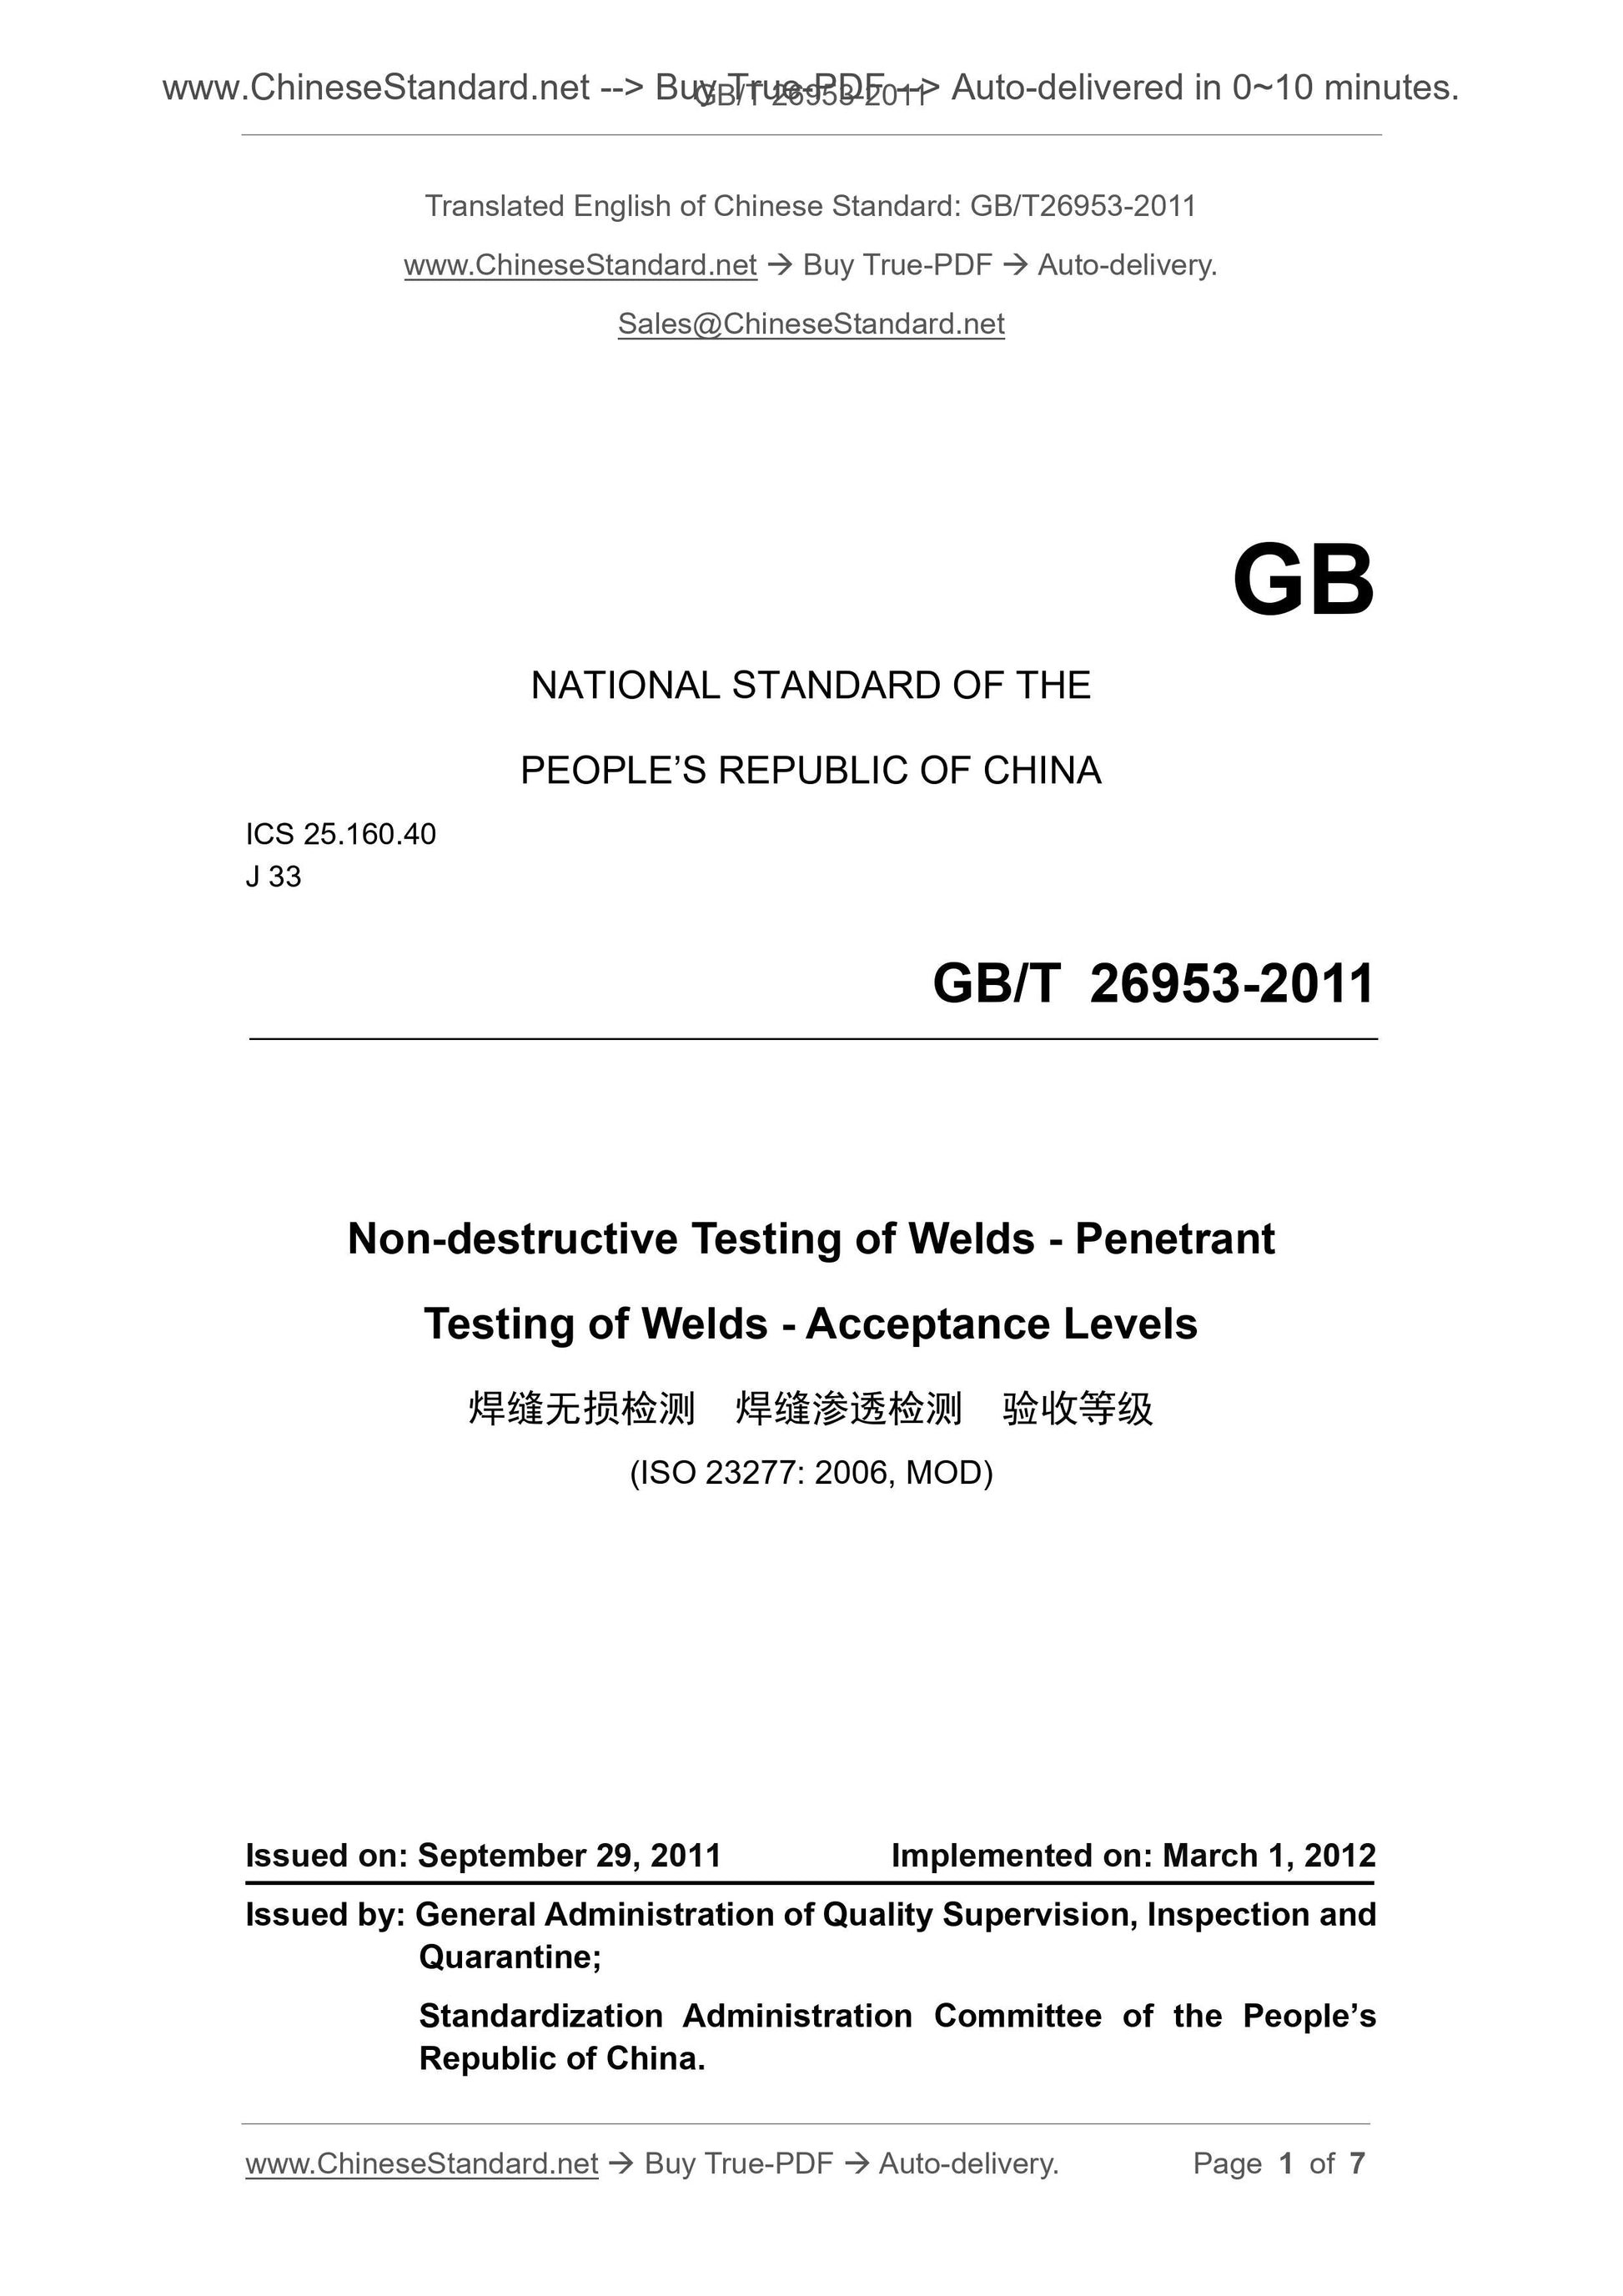 GB/T 26953-2011 Page 1